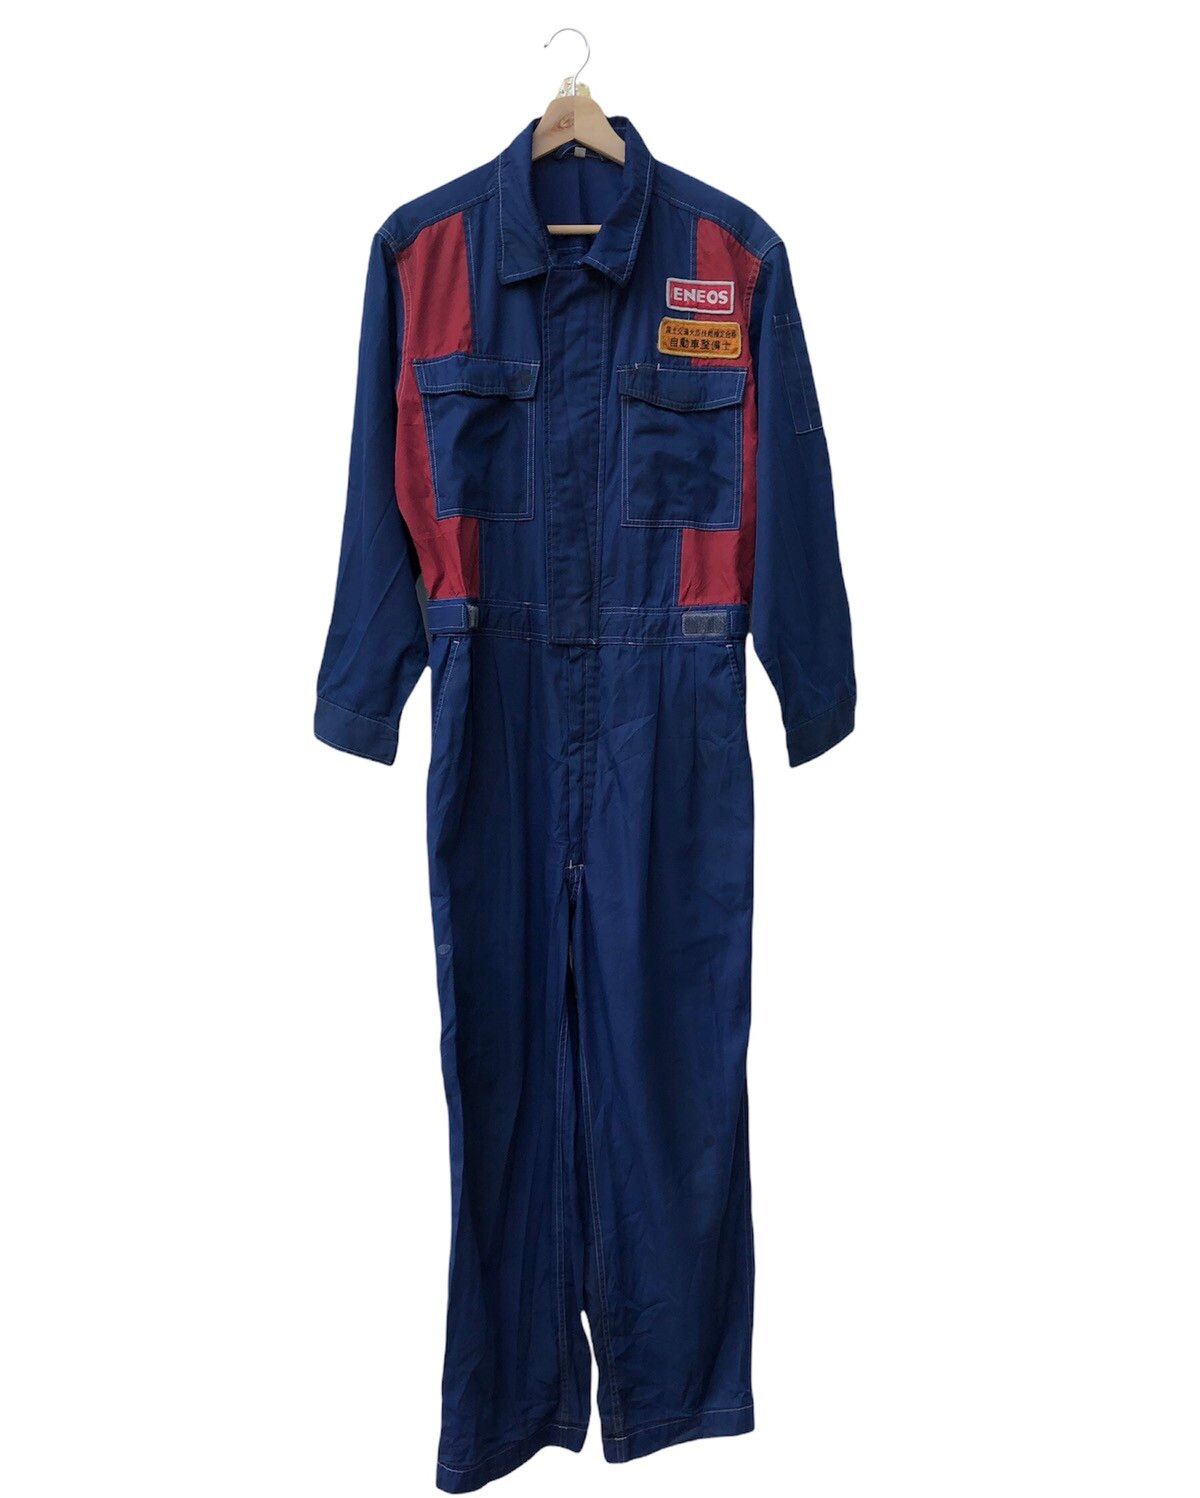 Sports Specialties - Japanese brans eneos workwear overall suit - 1